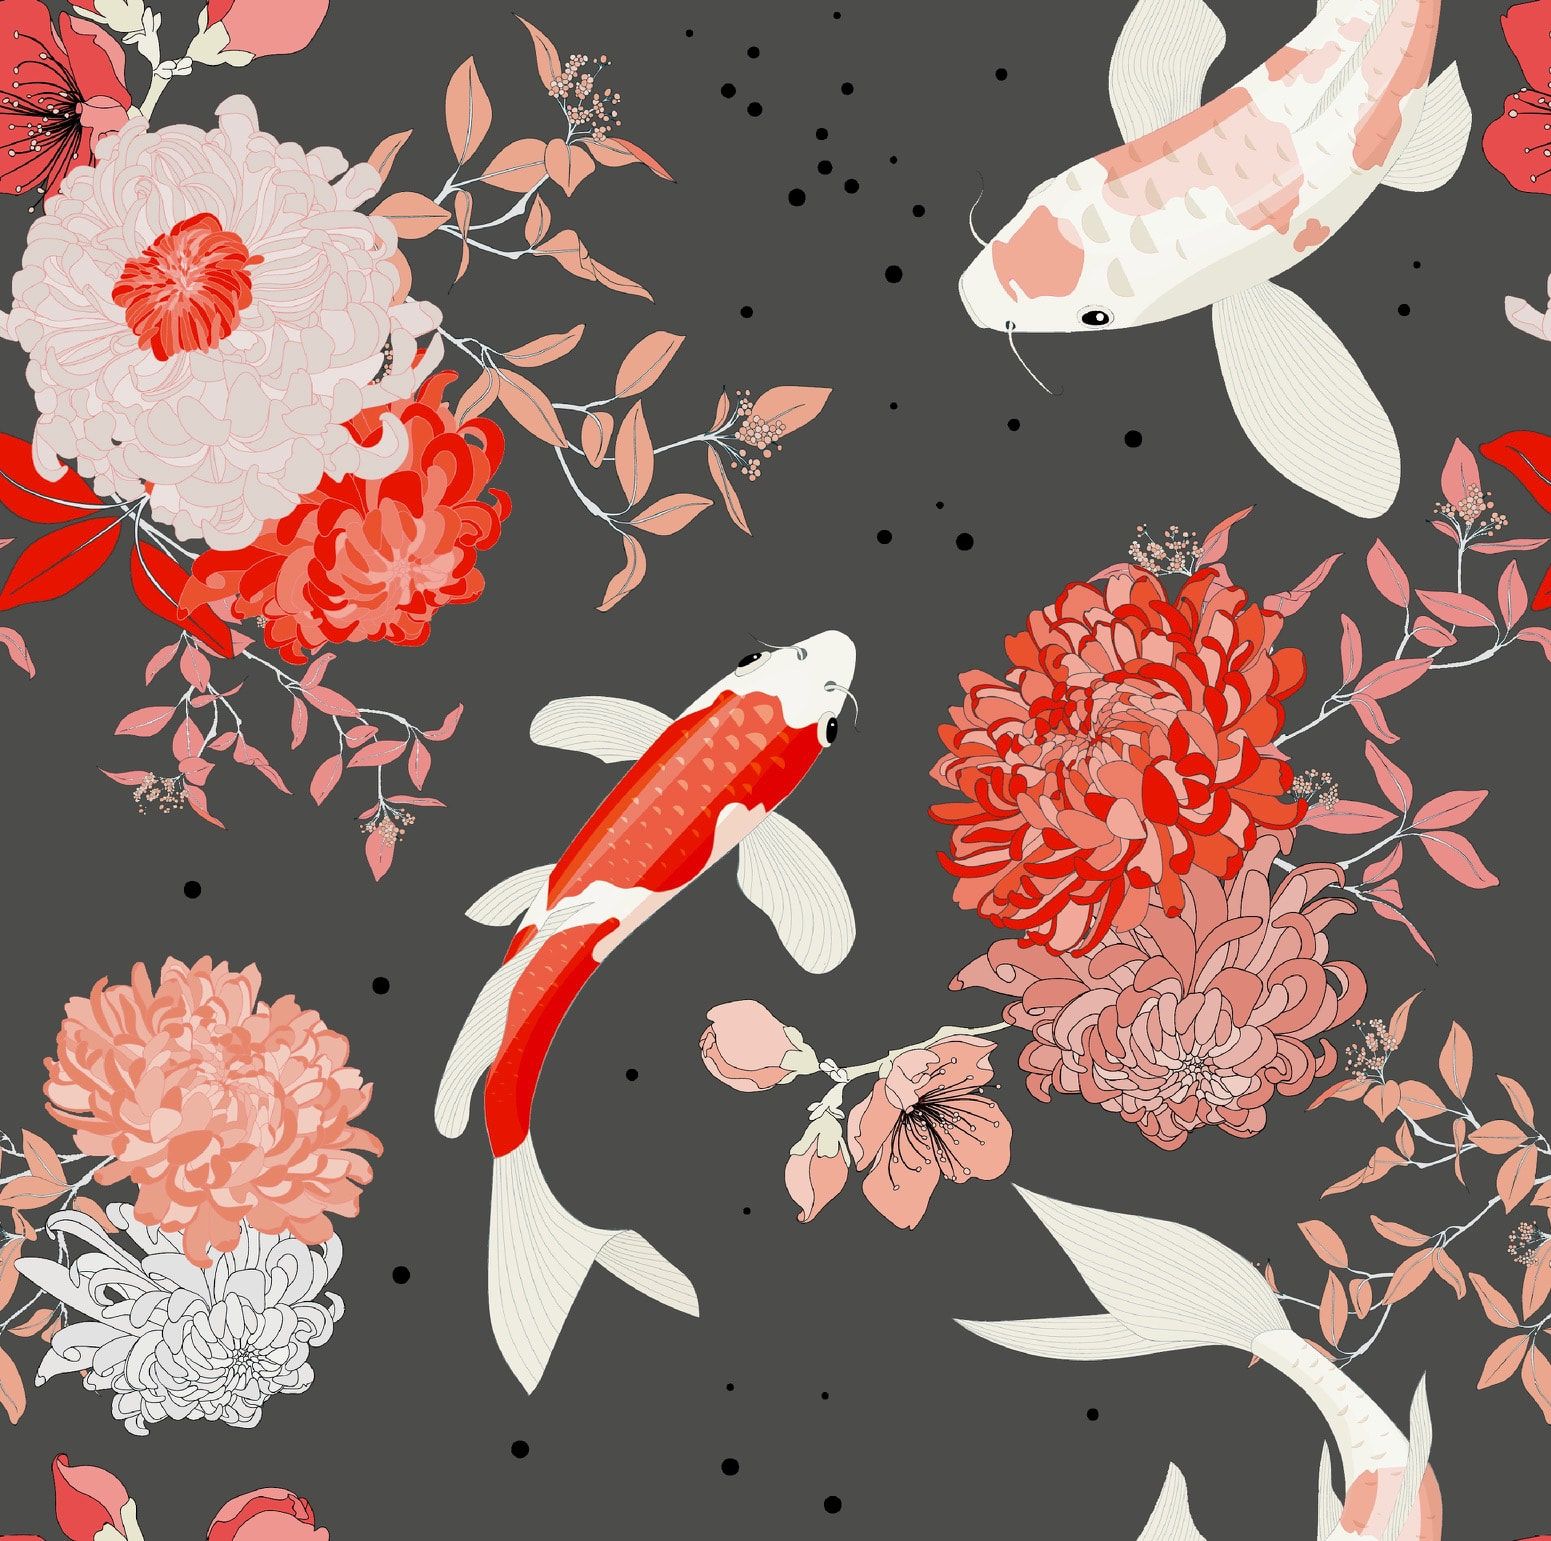 A pattern of koi fish and flowers - Koi fish